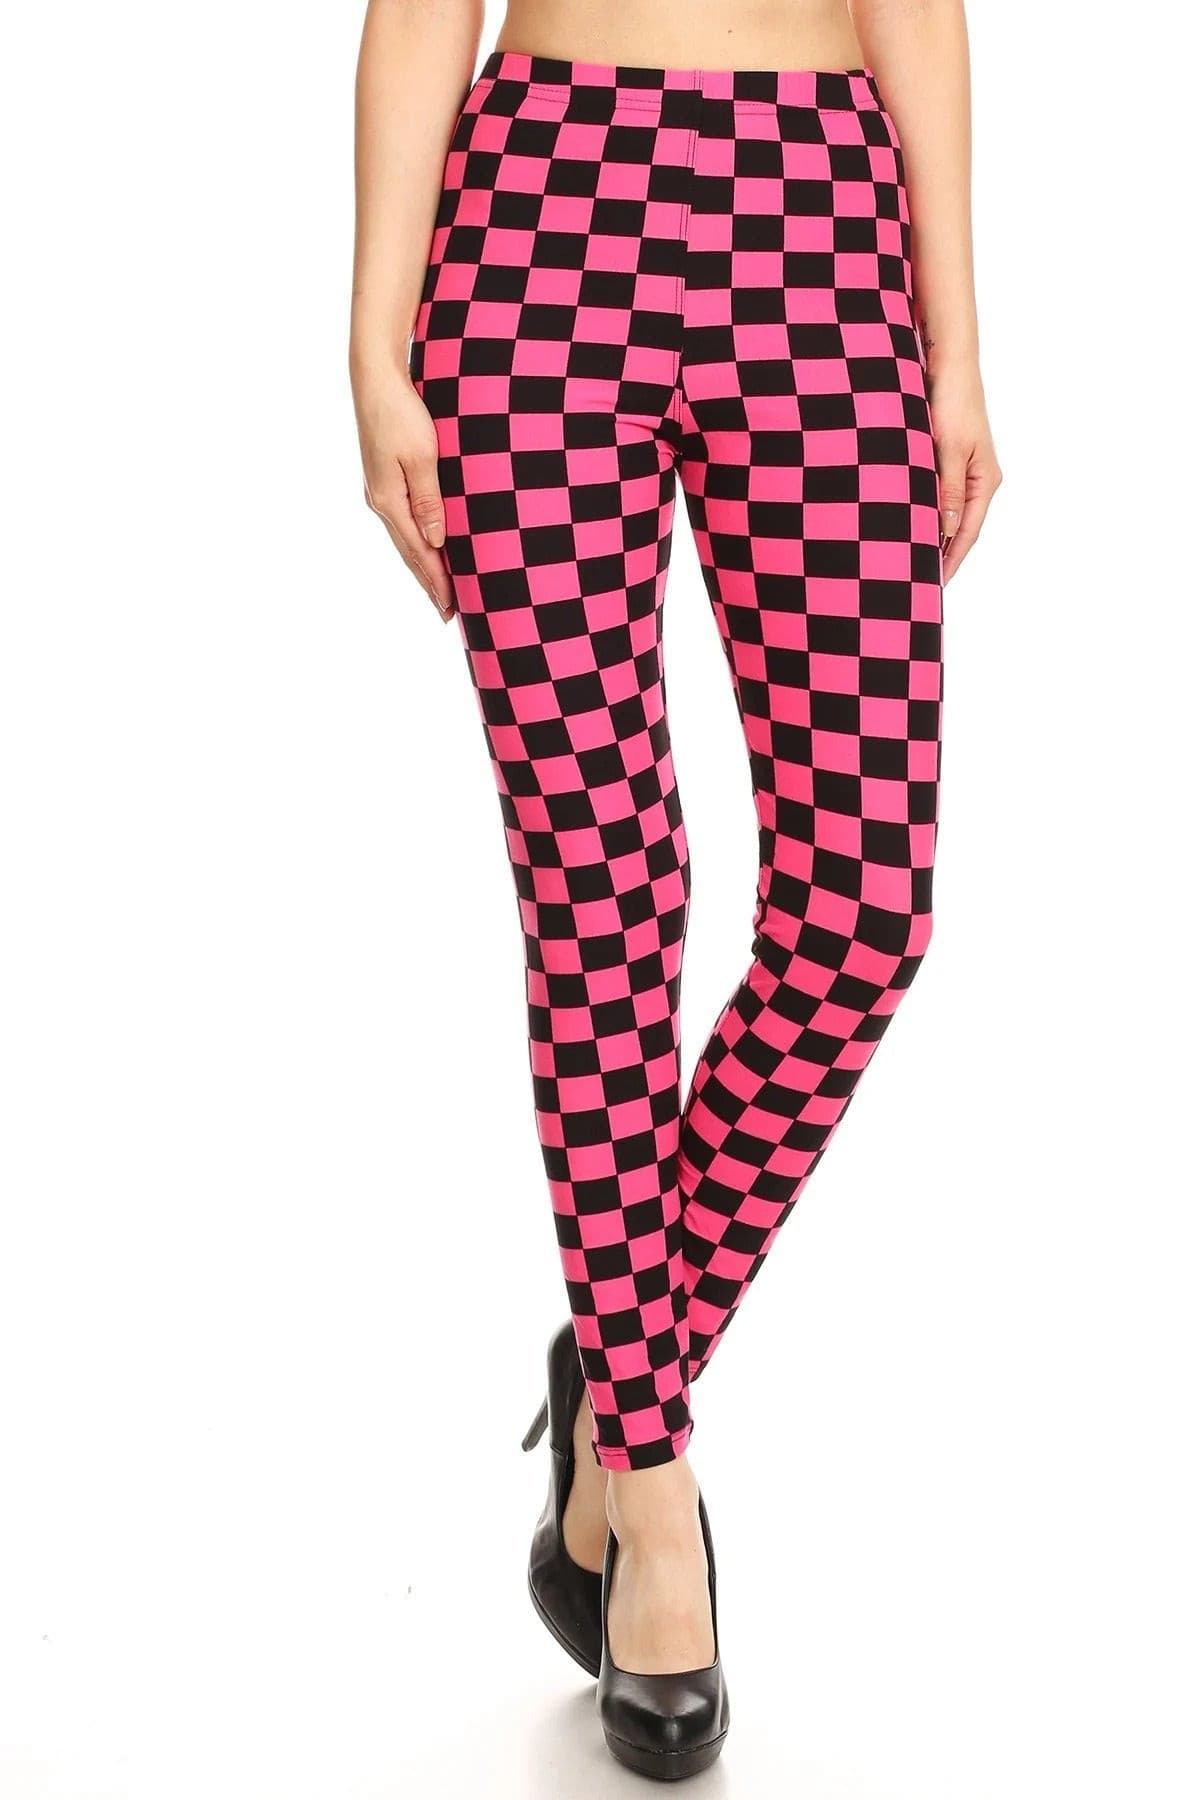 Checkered Printed High Waisted Leggings - Ships from The US - women's leggings at TFC&H Co.